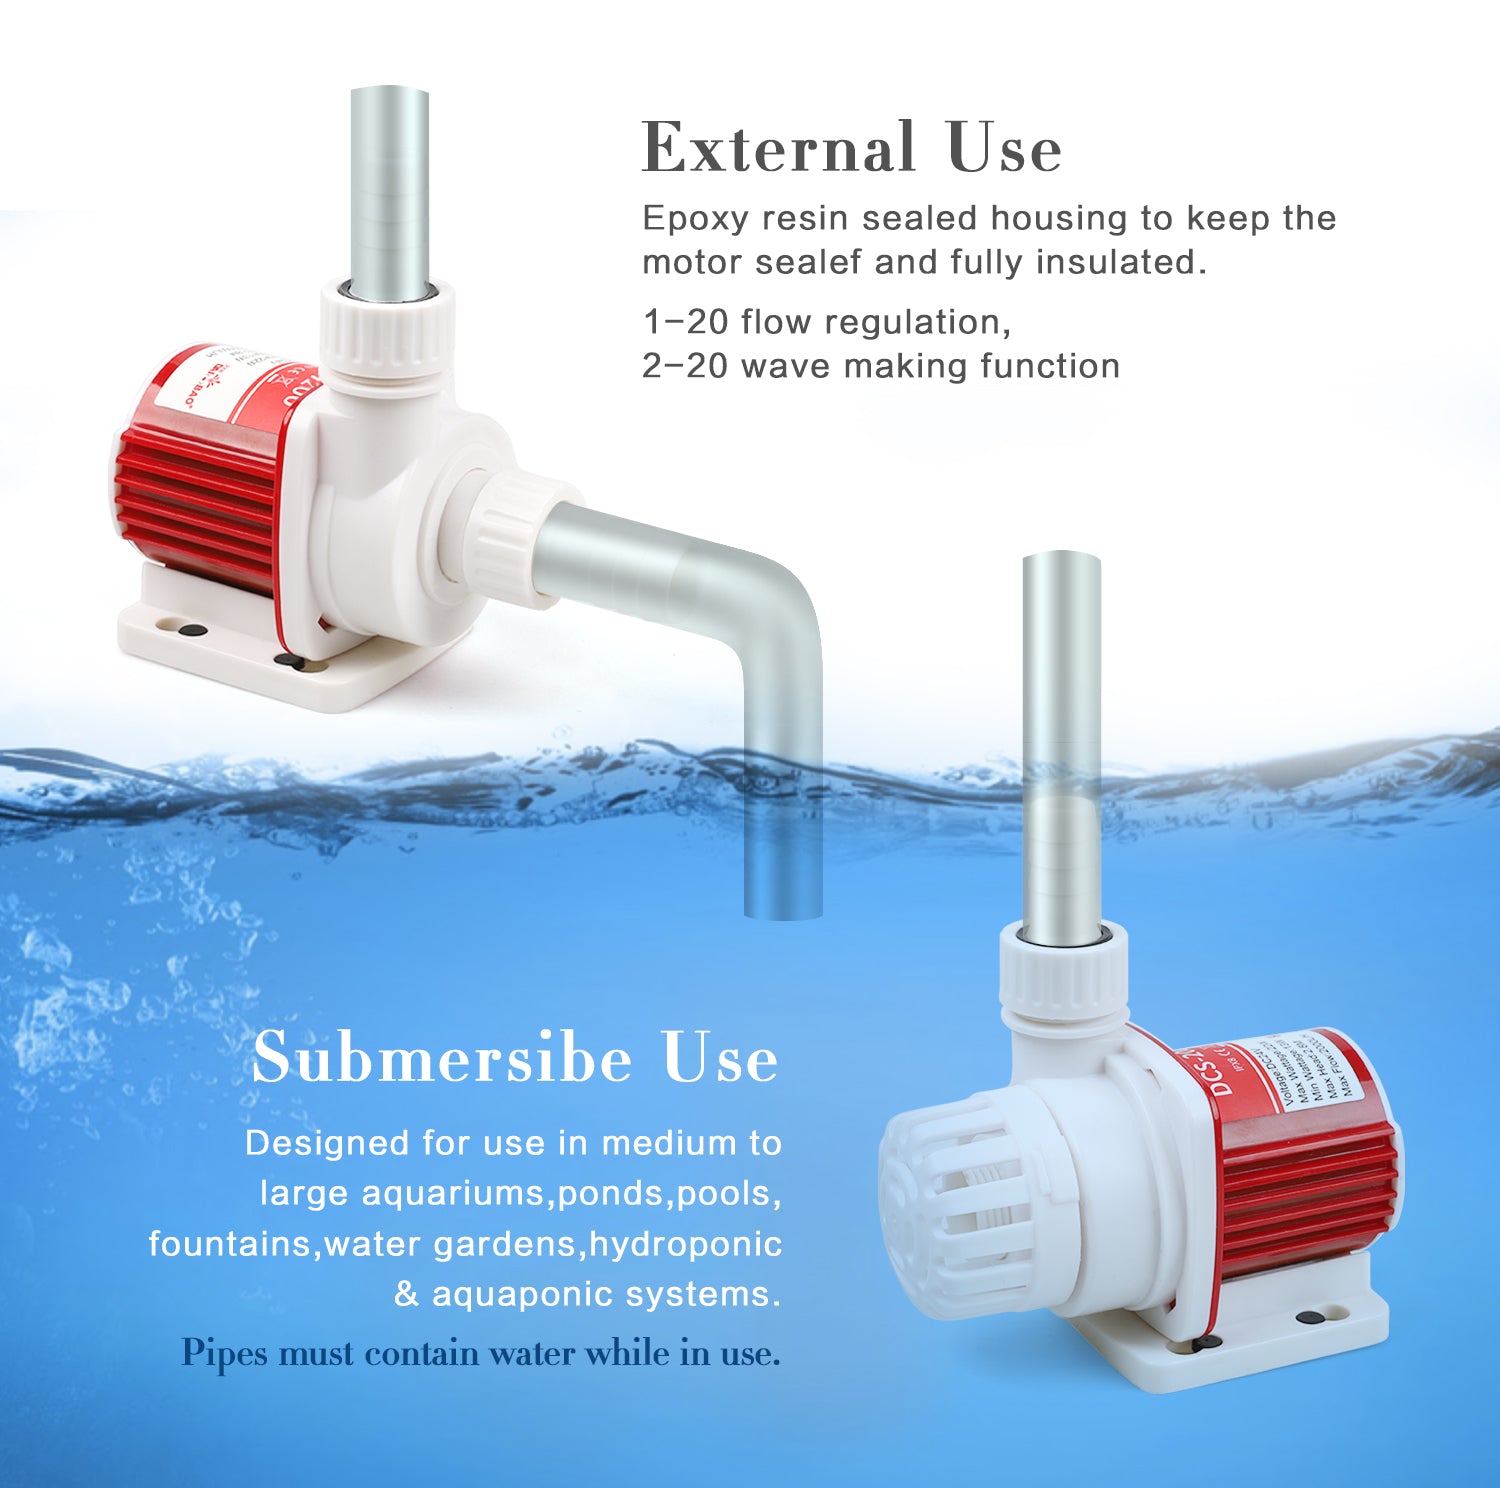 External Use Submersible Use